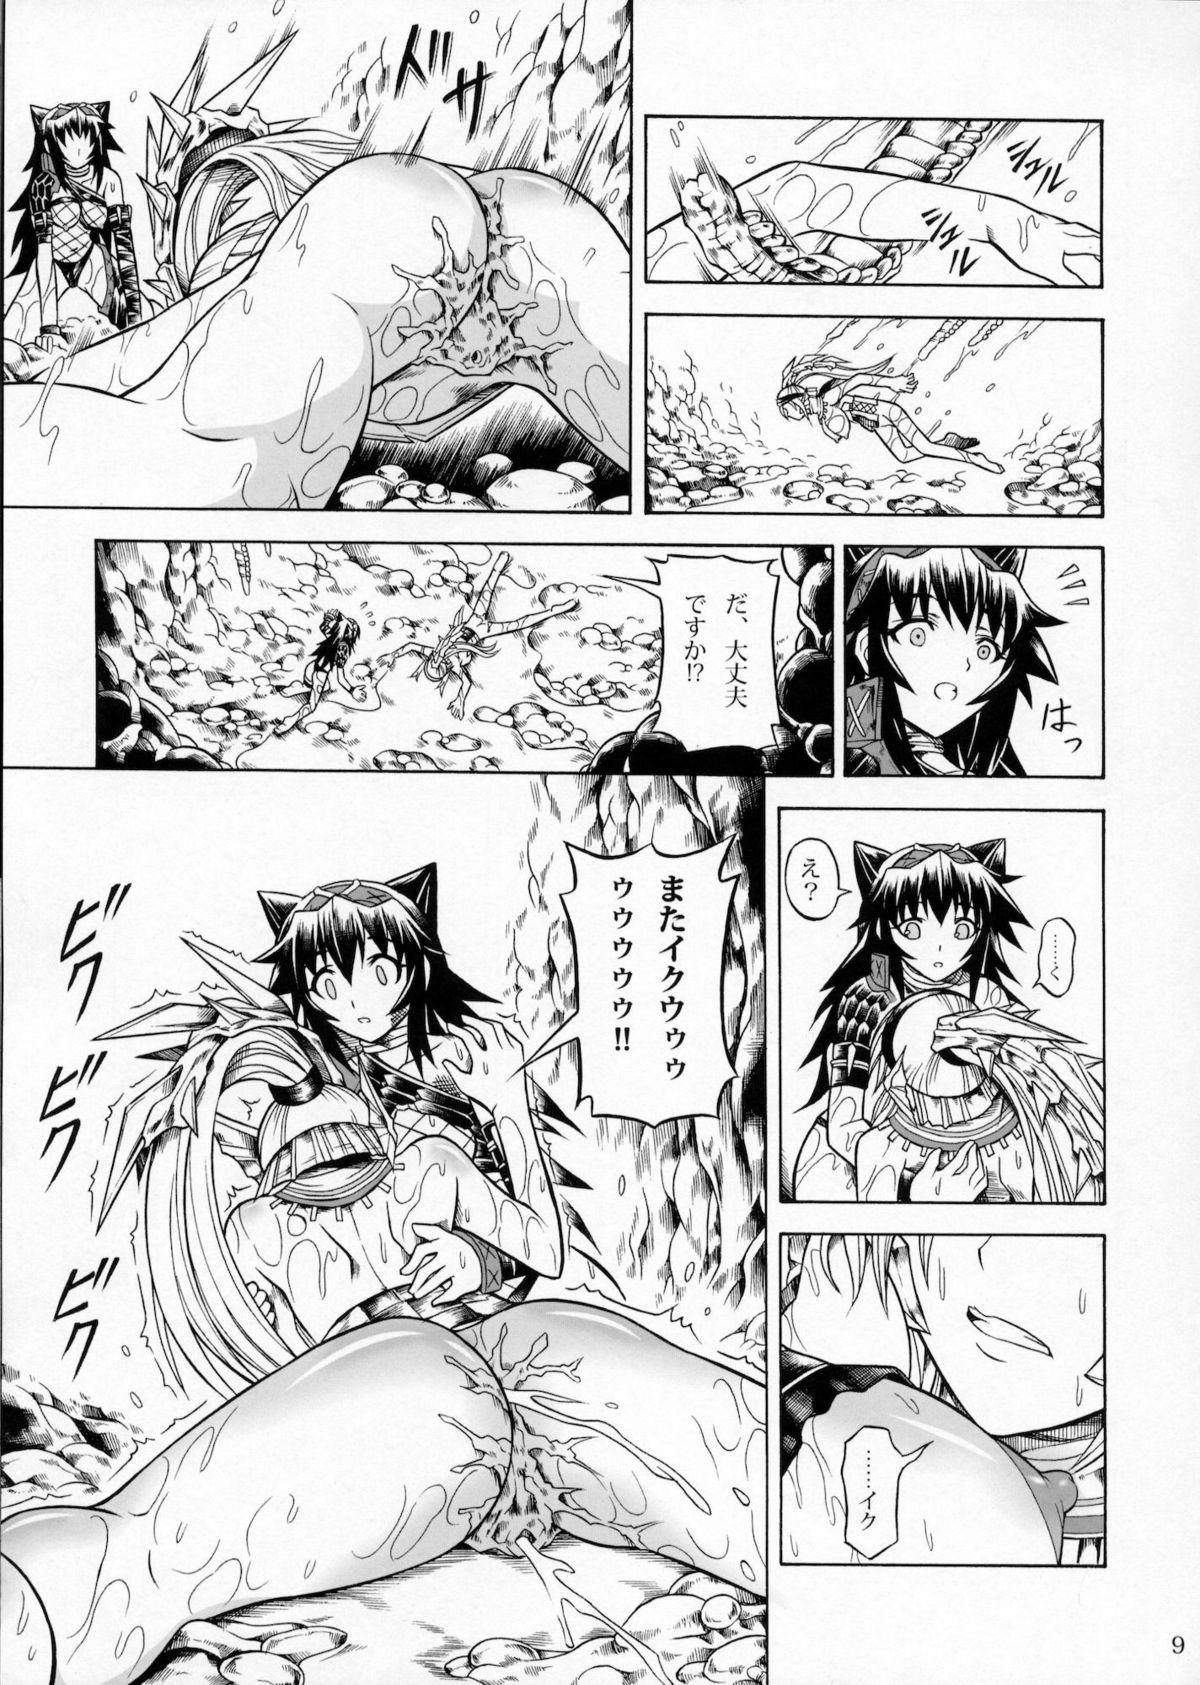 Hunks Solo Hunter no Seitai 2 The second part - Monster hunter Amatoriale - Page 8